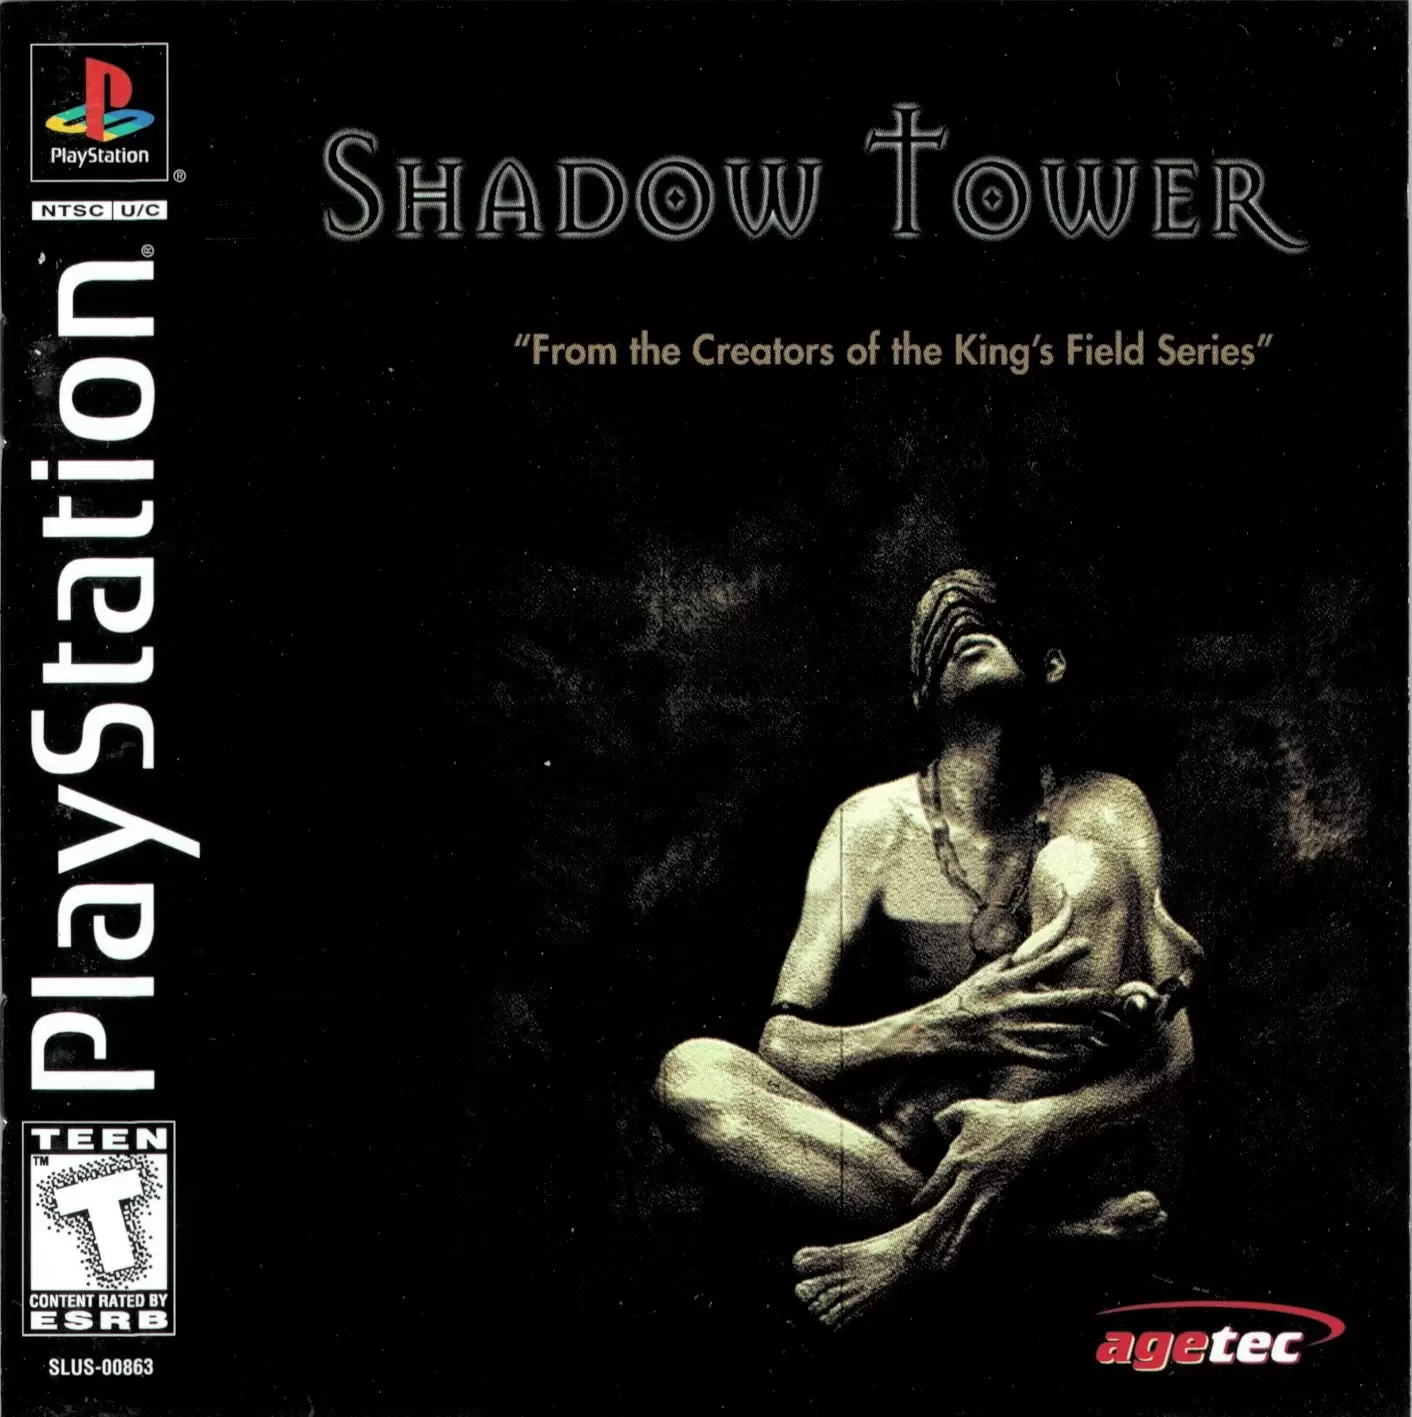 Playstation games - Shadow Tower